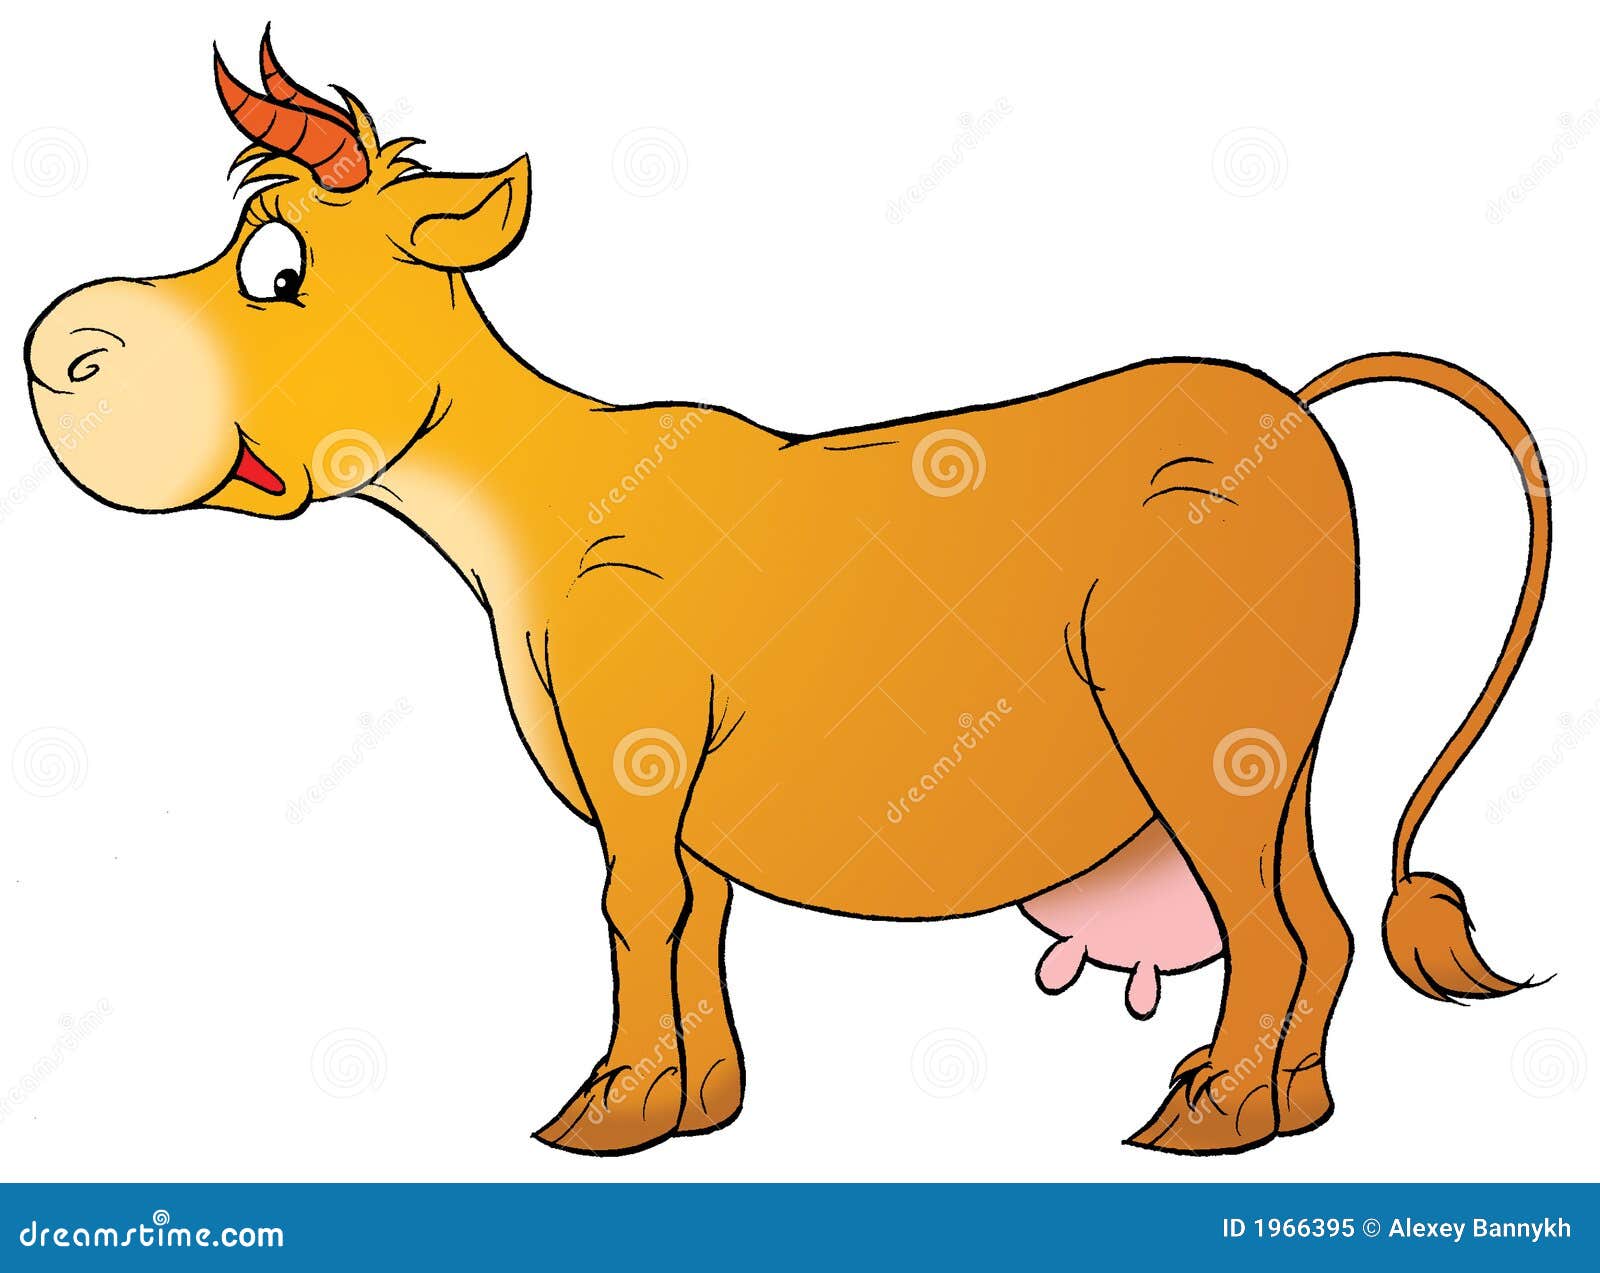 clipart brown cow - photo #14